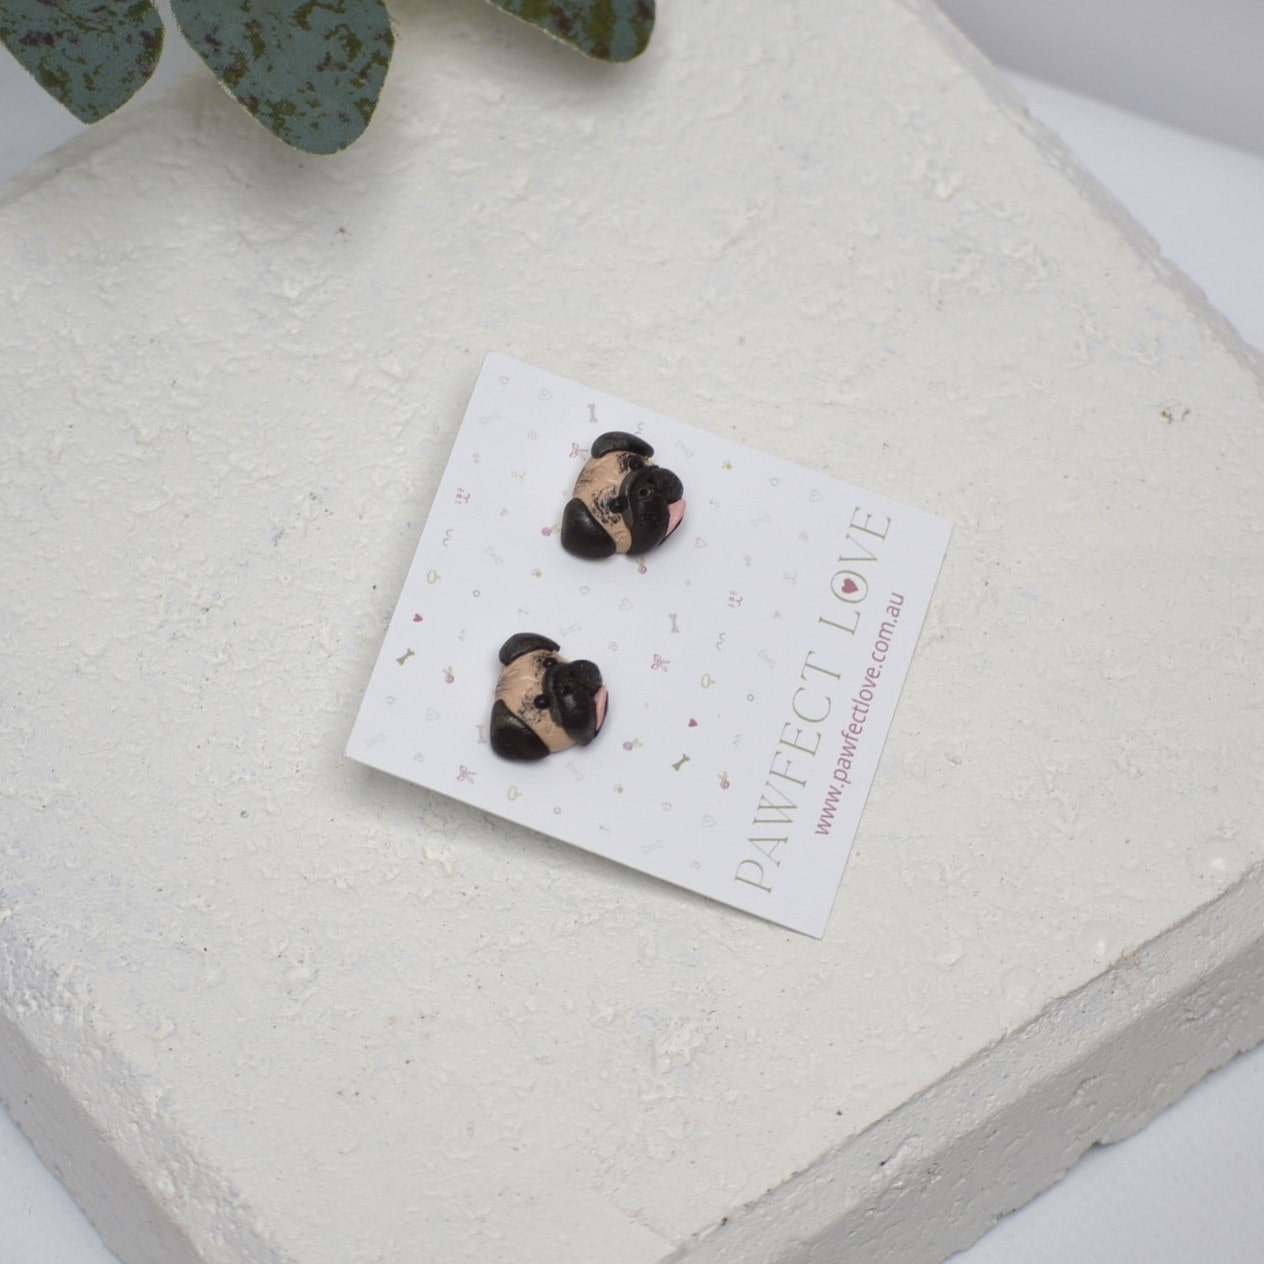 Handmade Pug stud earrings by Pawfect Love, positioned in front of white paver